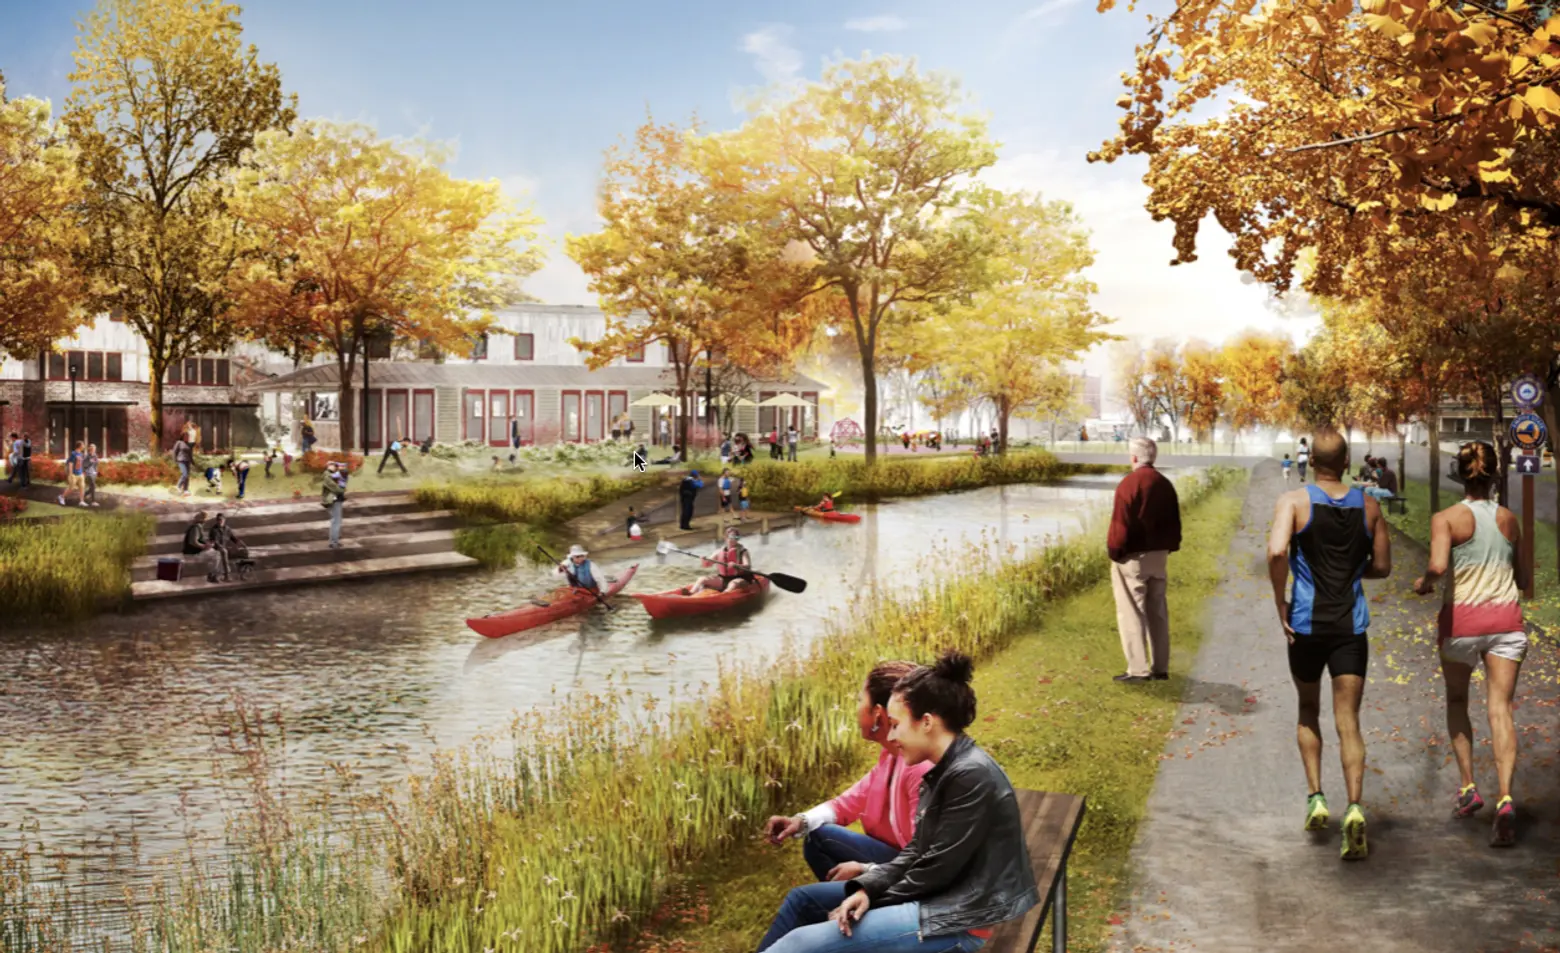 With a $300M proposal, the Erie Canal could become a reinvented upstate attraction